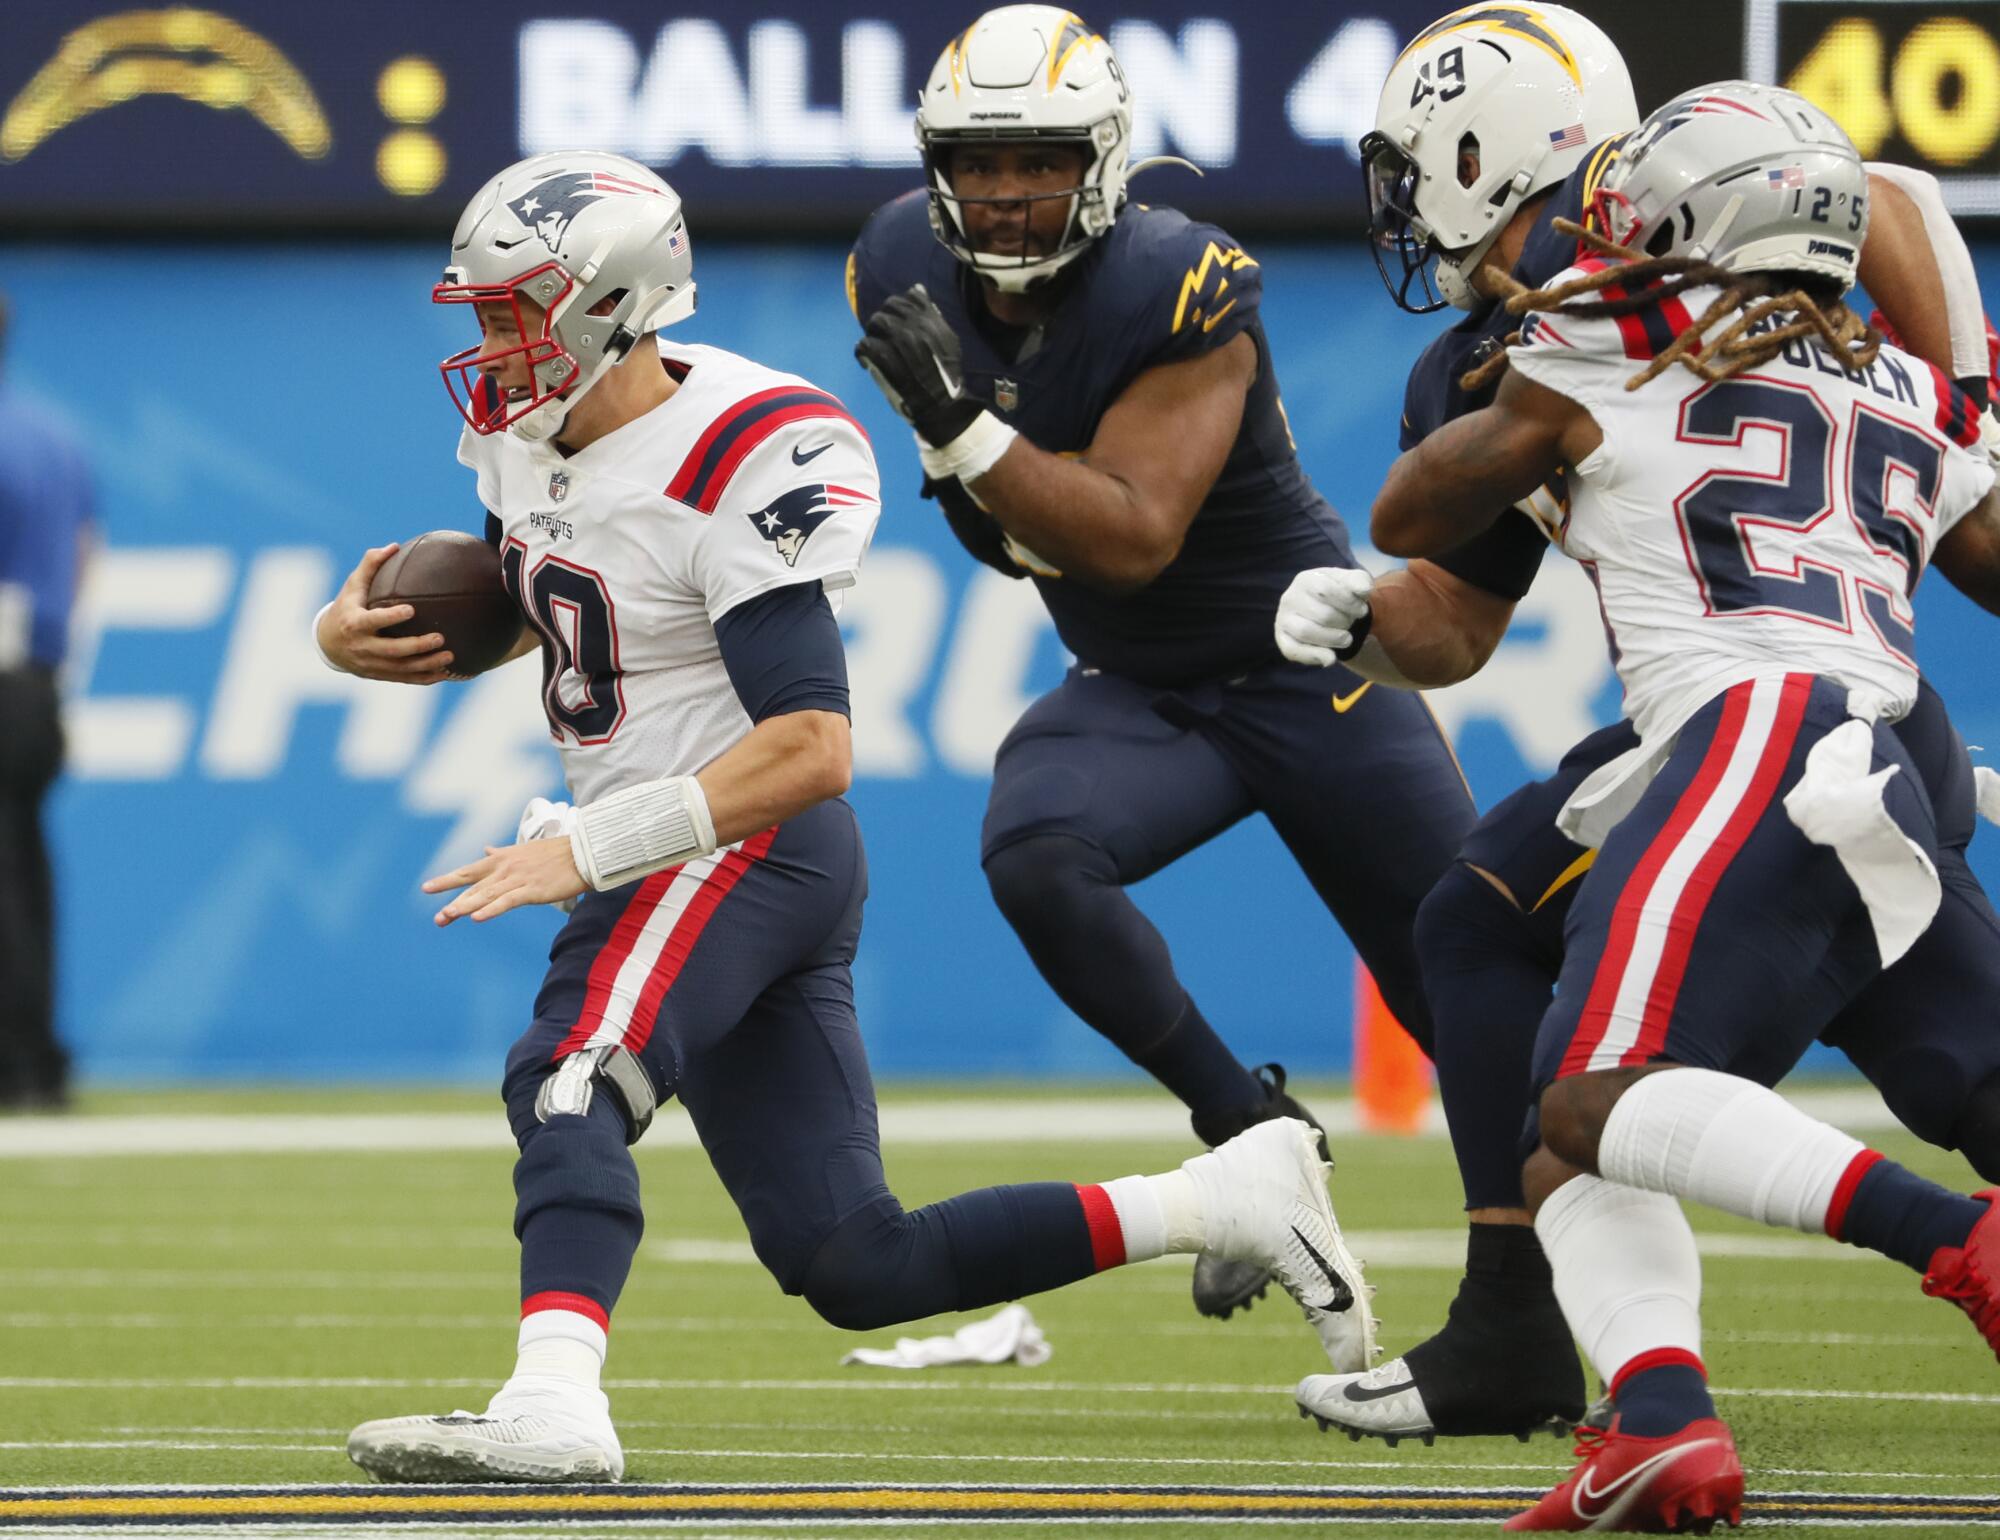 New England Patriots quarterback Mac Jones scrambles as he is chased by the Chargers' defense.